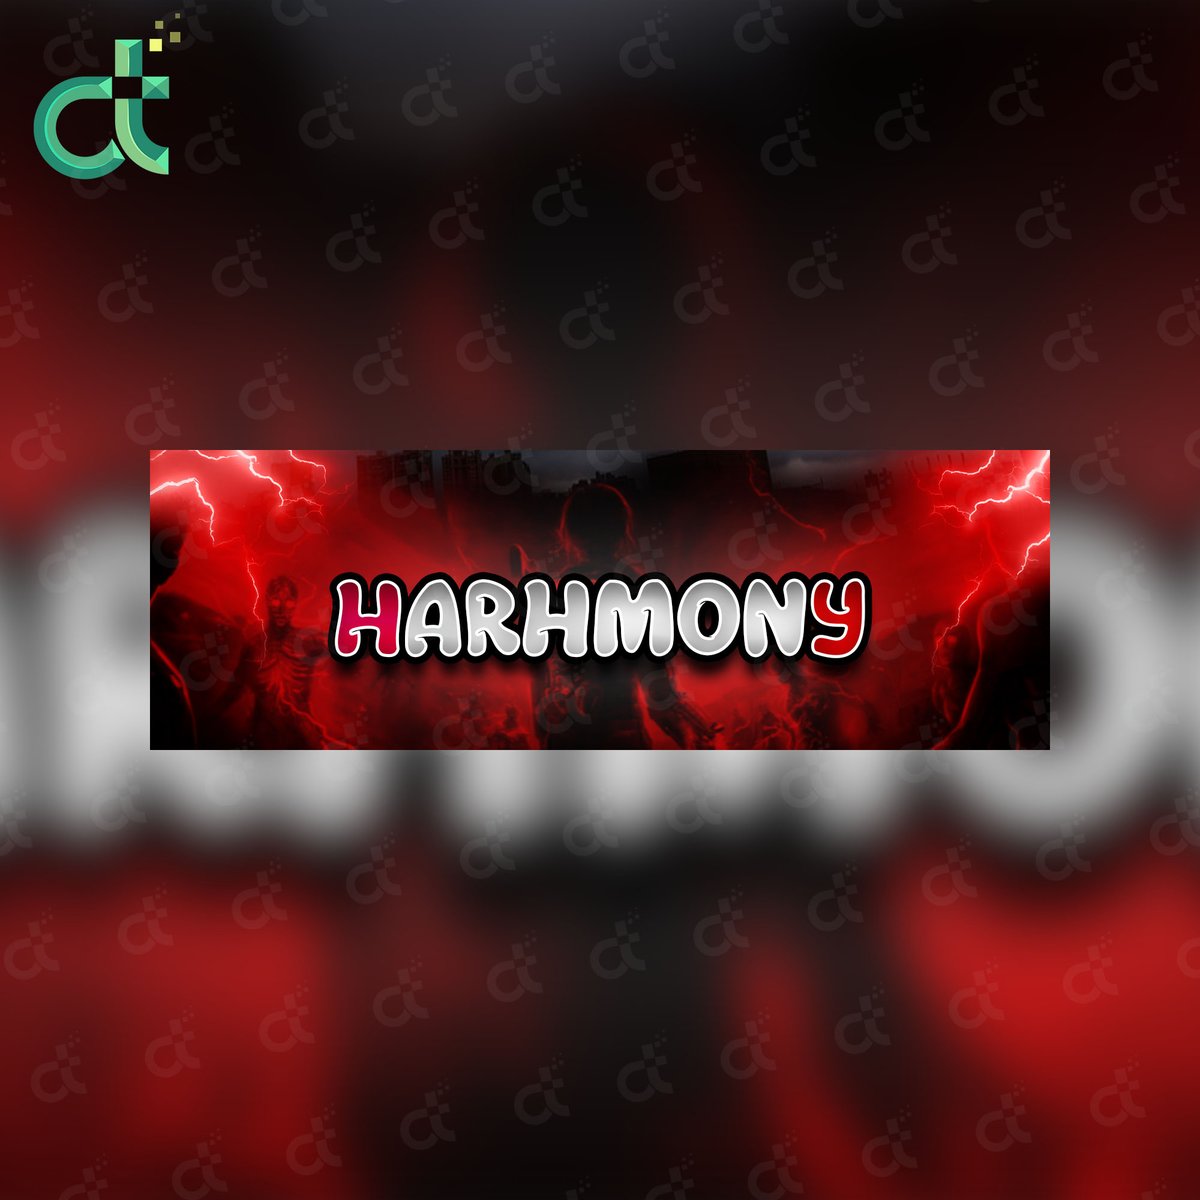 Looking for Banner Design?
#twitchstreaming #twitch #twitchstreamer #twitchtv #twitchaffiliate #twitchgamer #twitchstream #twitchgaming #twitchstreamers #twitchcommunity #twitchclips #streamer #gaming #gamer #twitchlive #twitchprime #streaming #twitchgirls #twitchcreative #ps